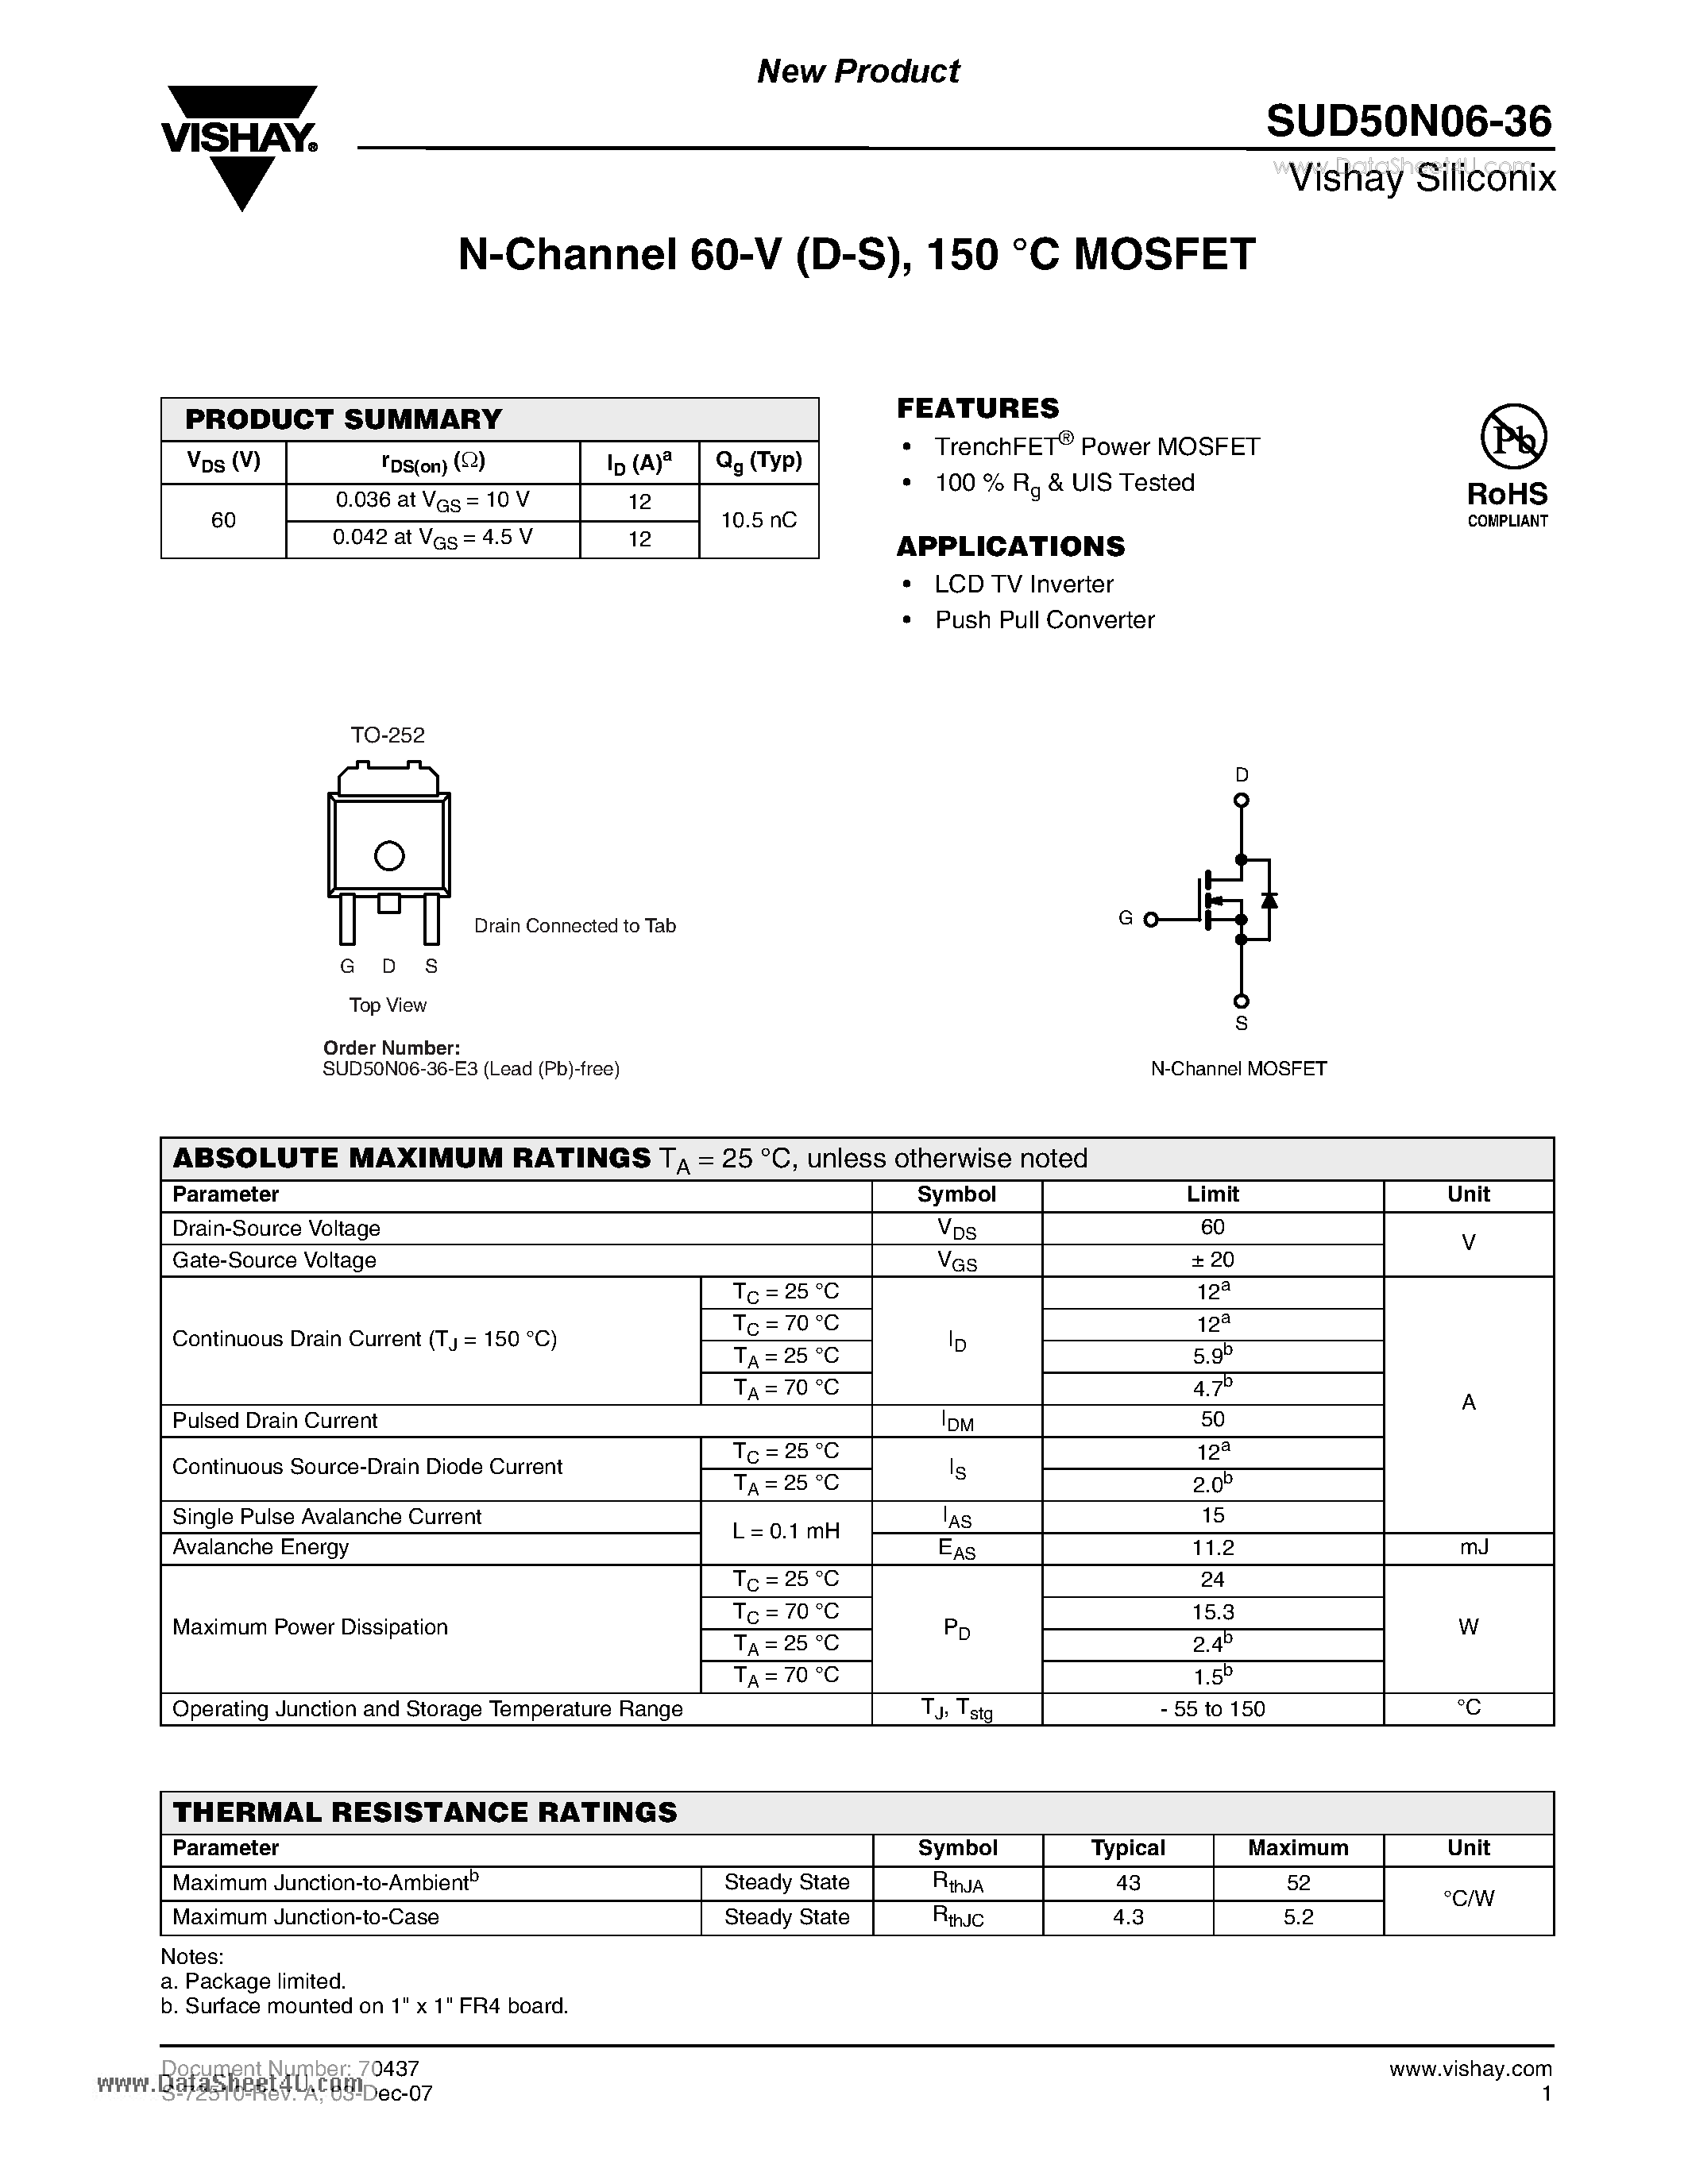 Datasheet SUD50N06-36 - N-Channel 60-V (D-S) 150 C MOSFET page 1